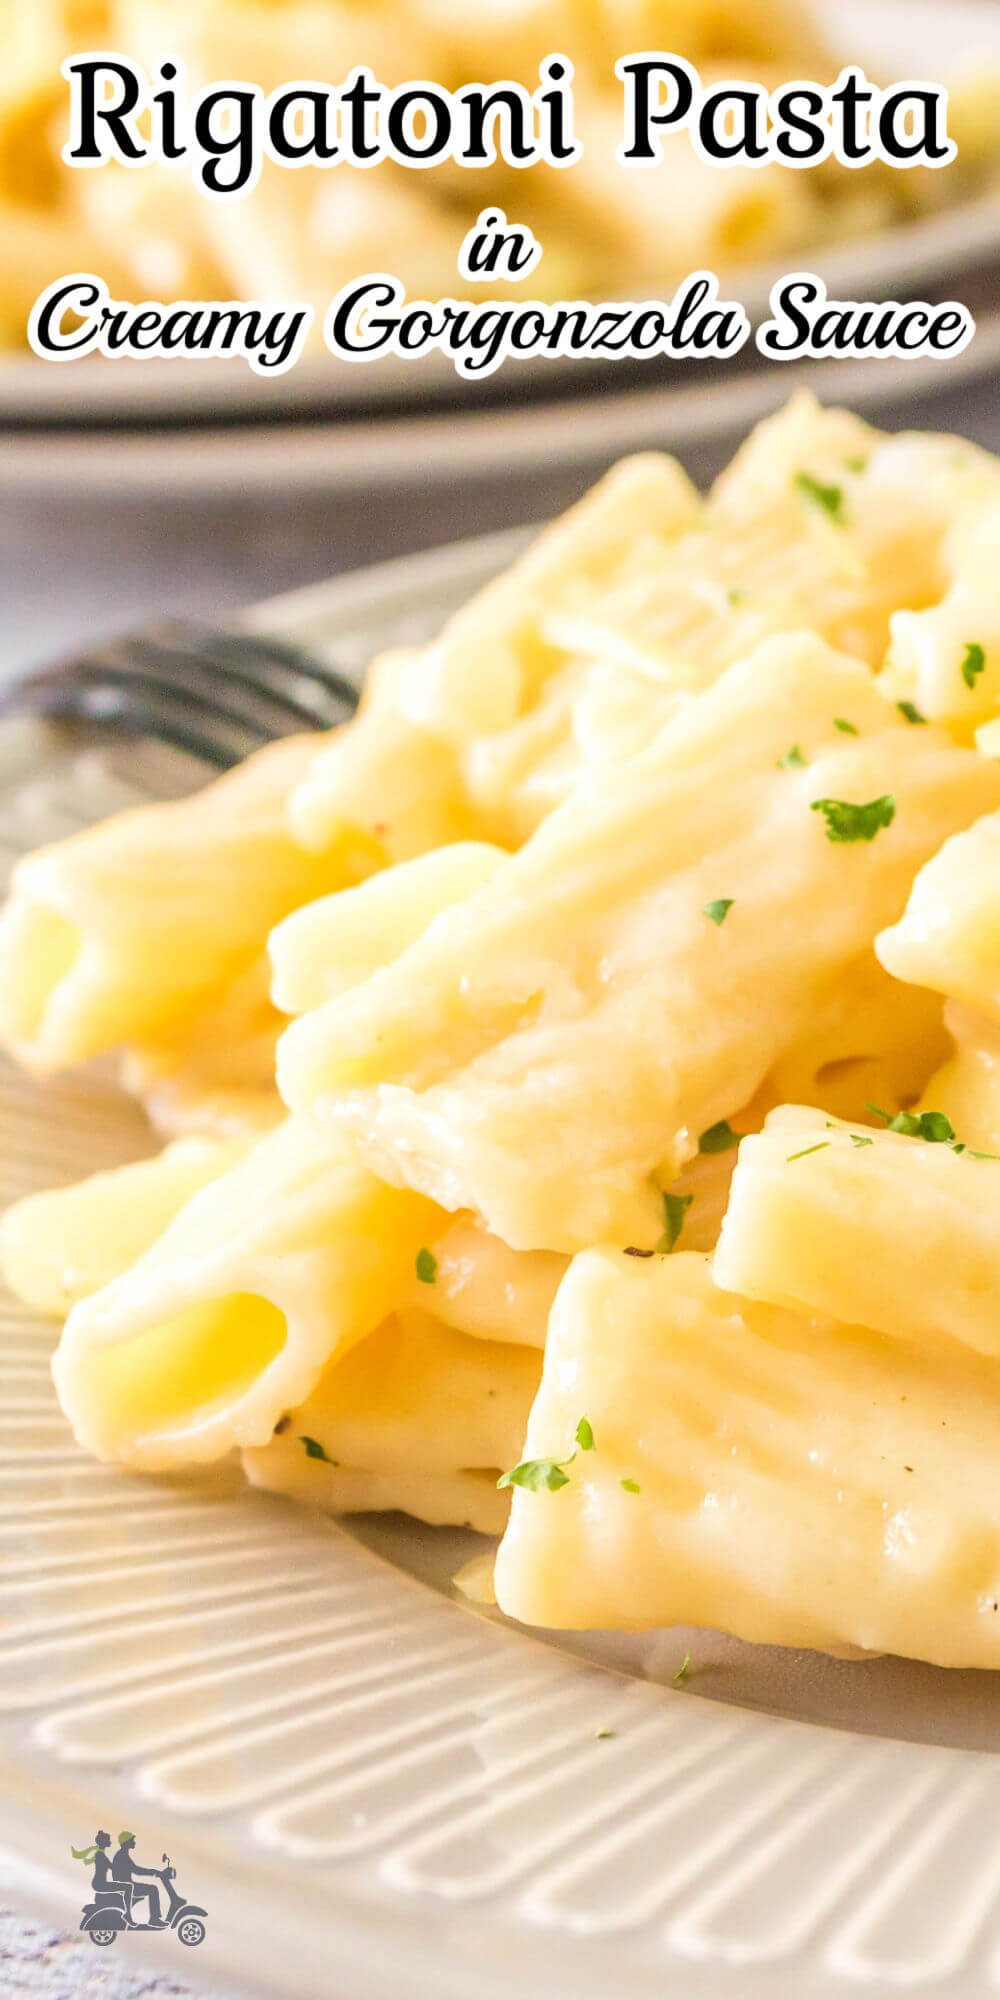 Gorgonzola pasta is a cheese pasta recipe like no other! The surprising combination of apples, onion, and gorgonzola cheese to make this simple cheese sauce is genius! Toss in the al dente pasta and sprinkle each serving with fresh herbs for an easy and irresistible midweek family meal!